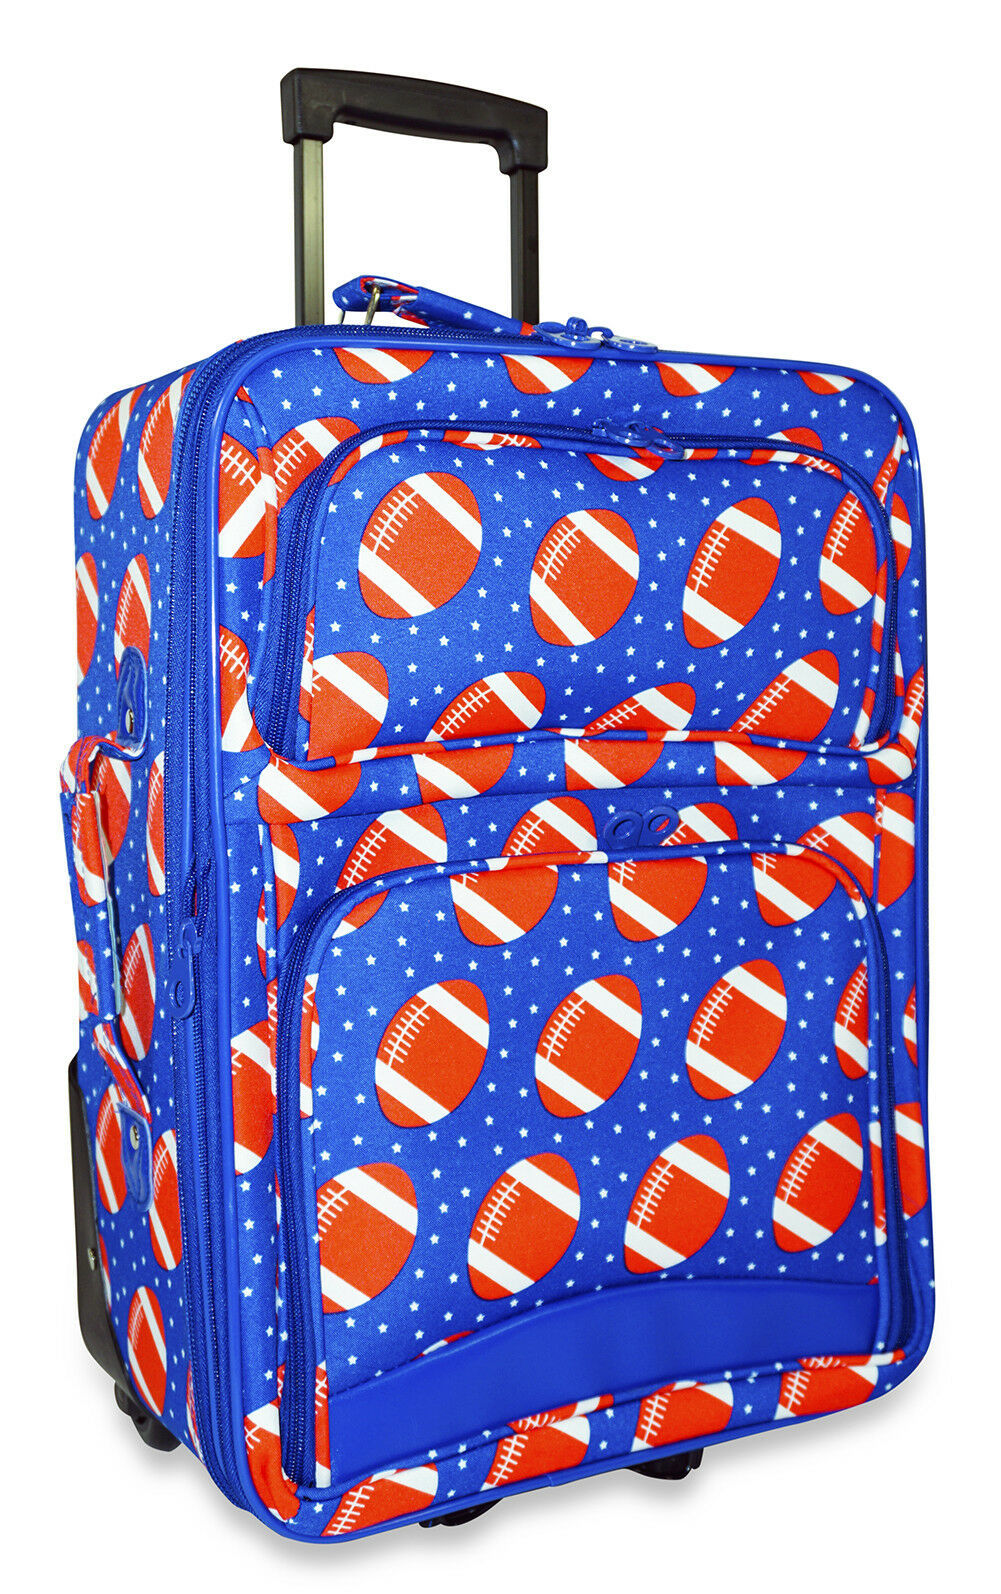 Football Carry On Luggage Suitcase Travel Small Rolling Wheeled Expandable - Luggage